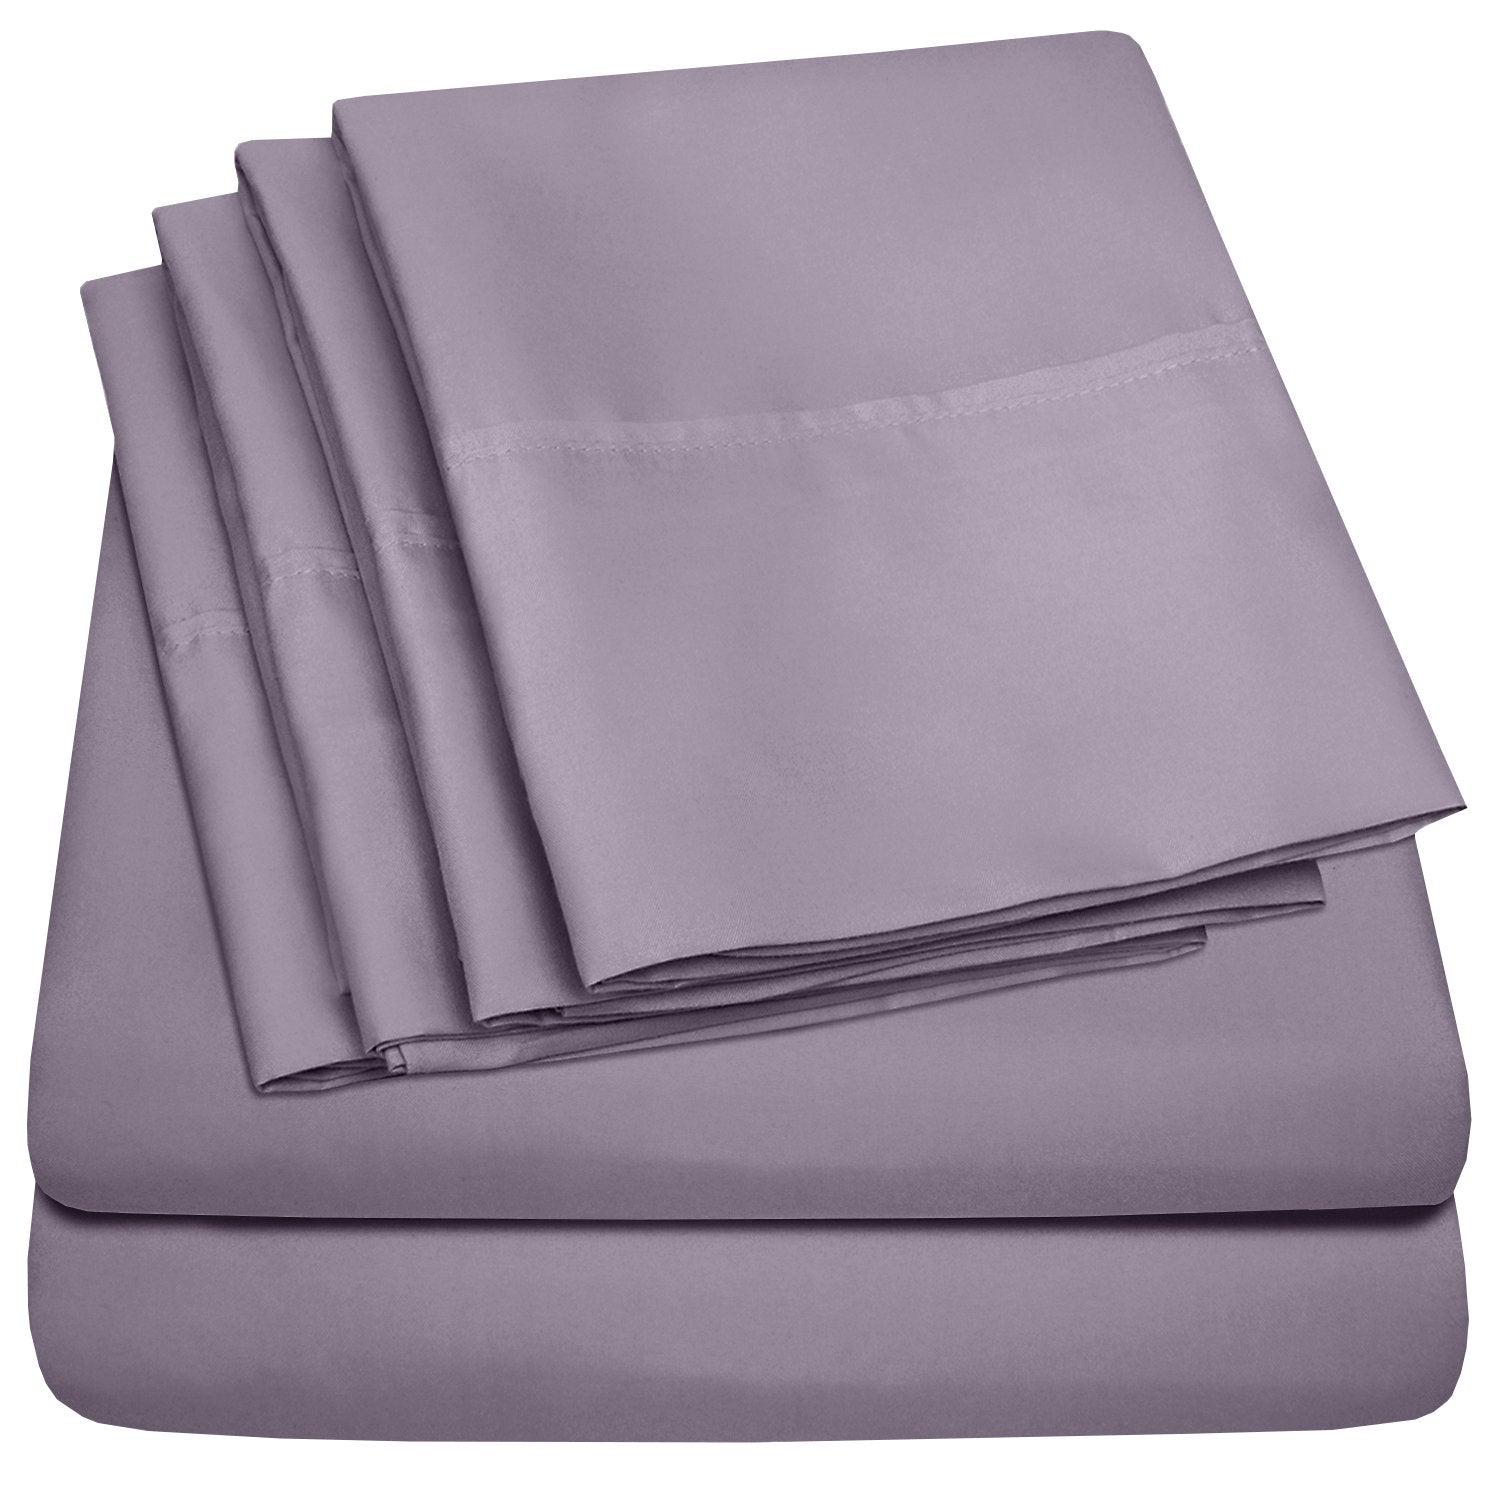 Deluxe 6-Piece Bed Sheet Set (Plum) - Folded